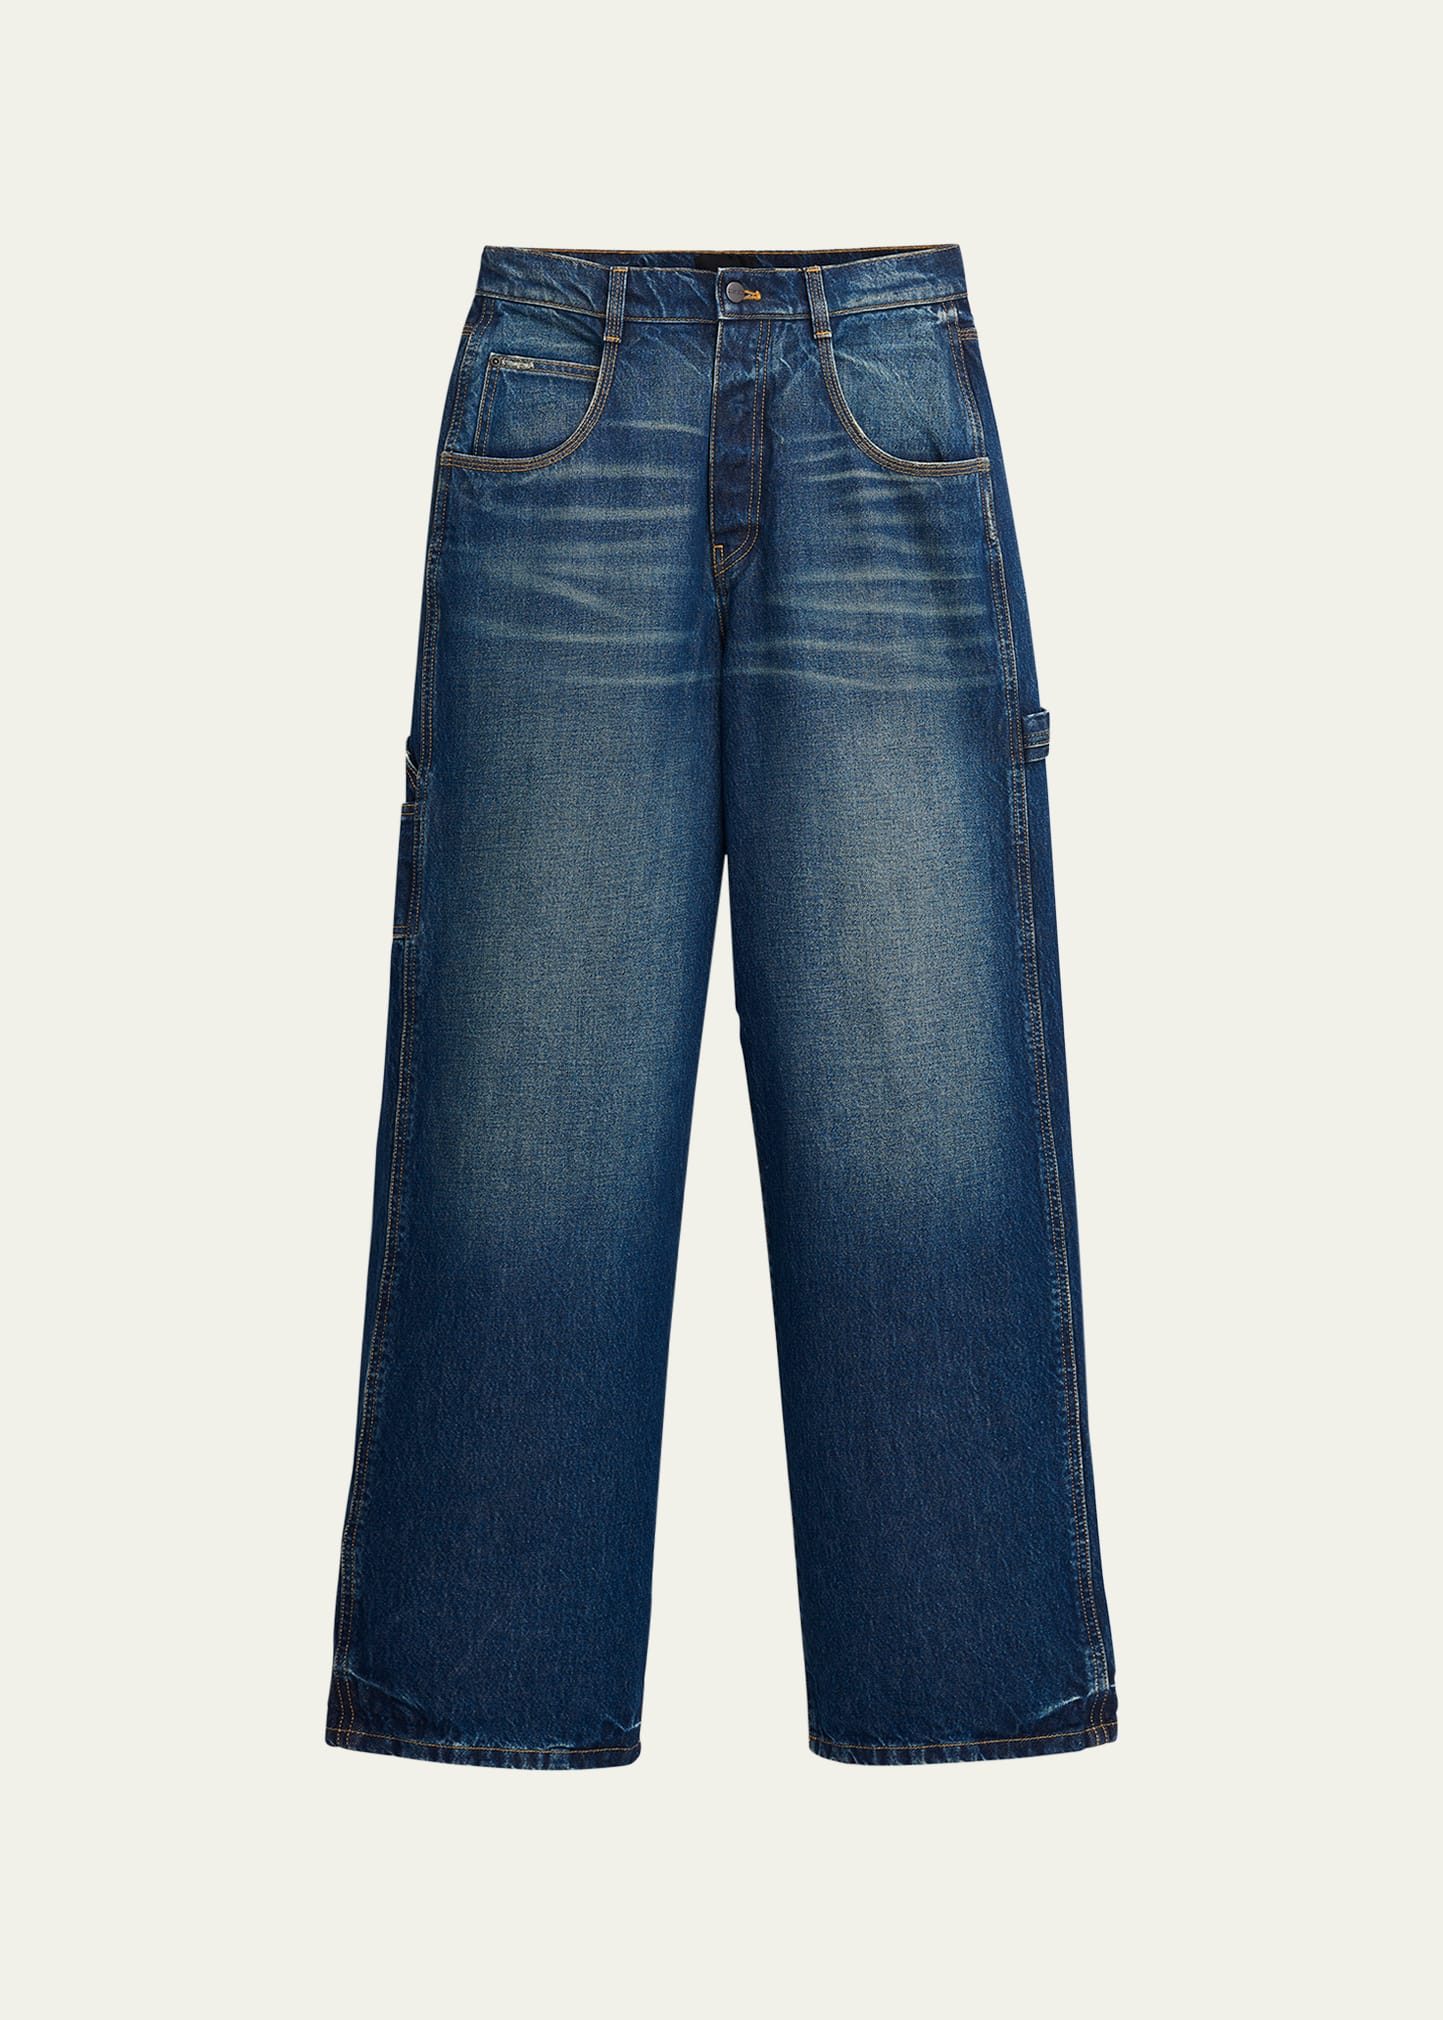 MARC JACOBS OVERSIZED JEANS